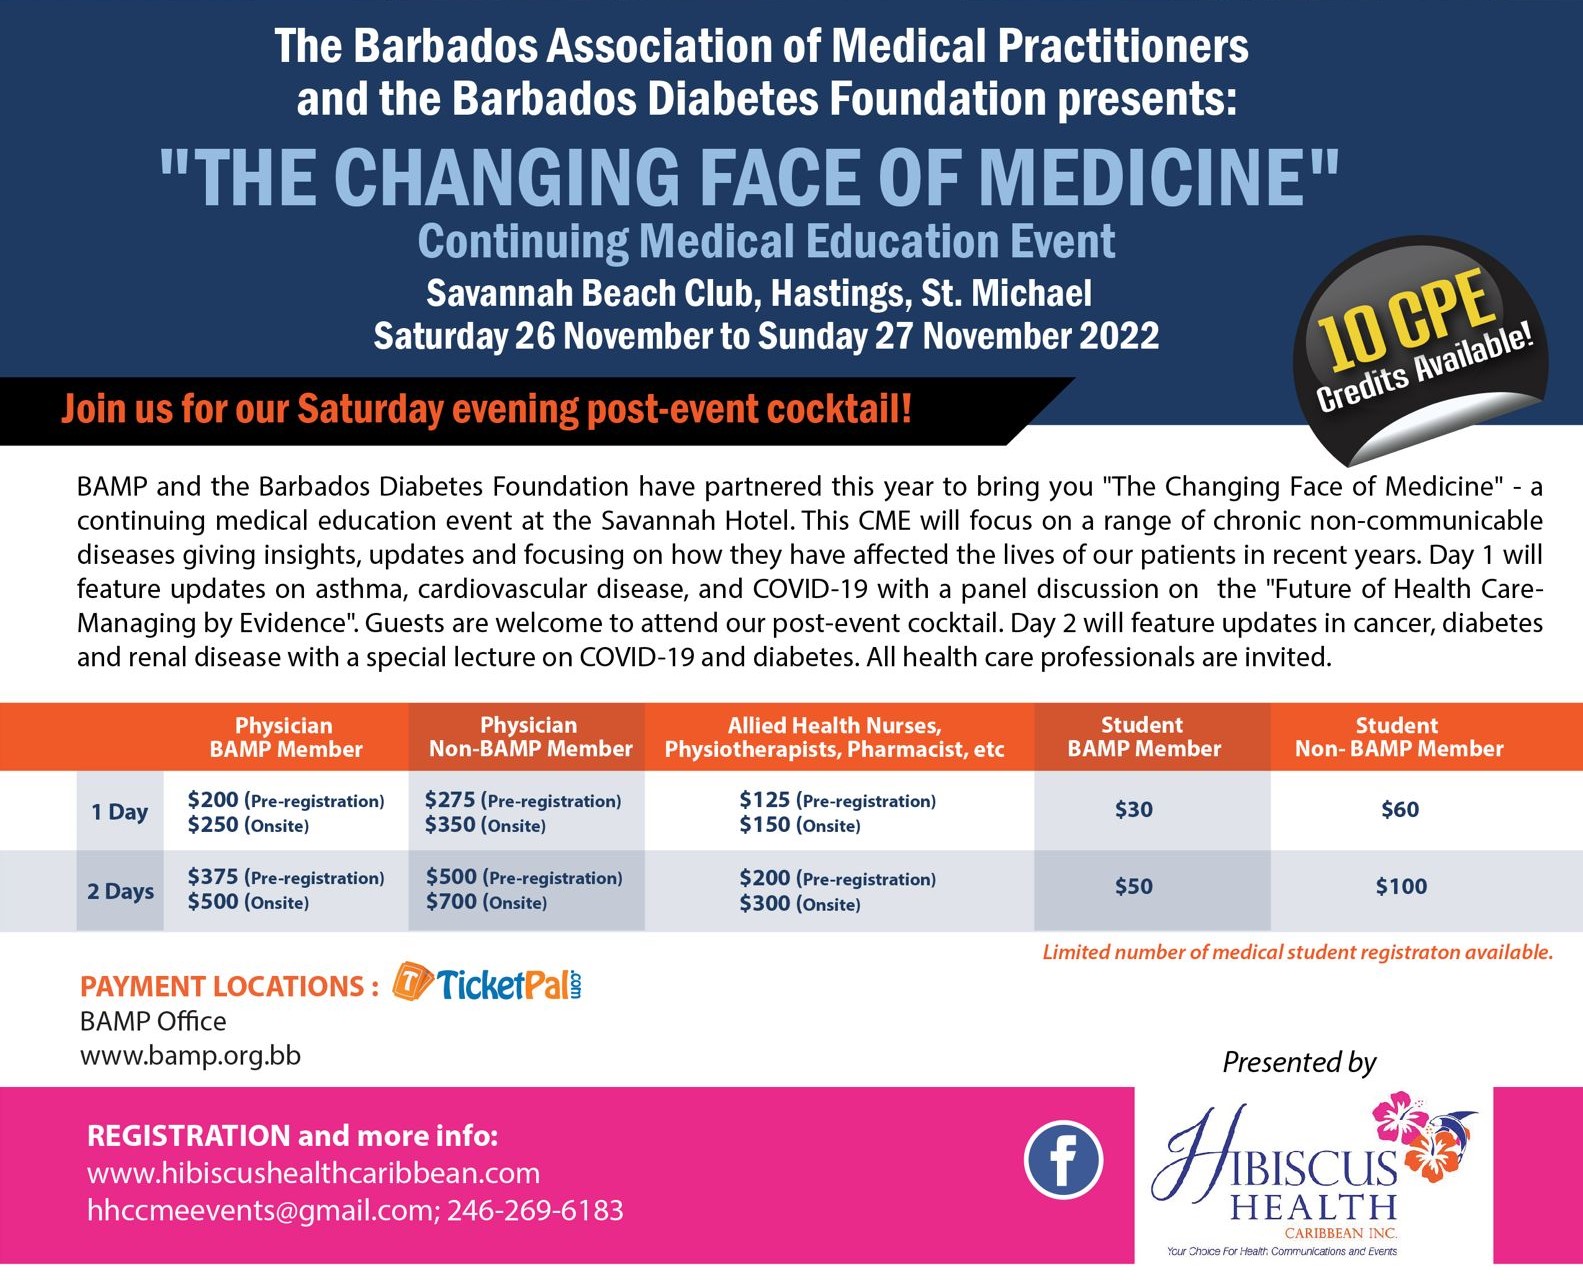 BAMP/Barbados Diabetes Foundation CME: The Changing Face of Medicine